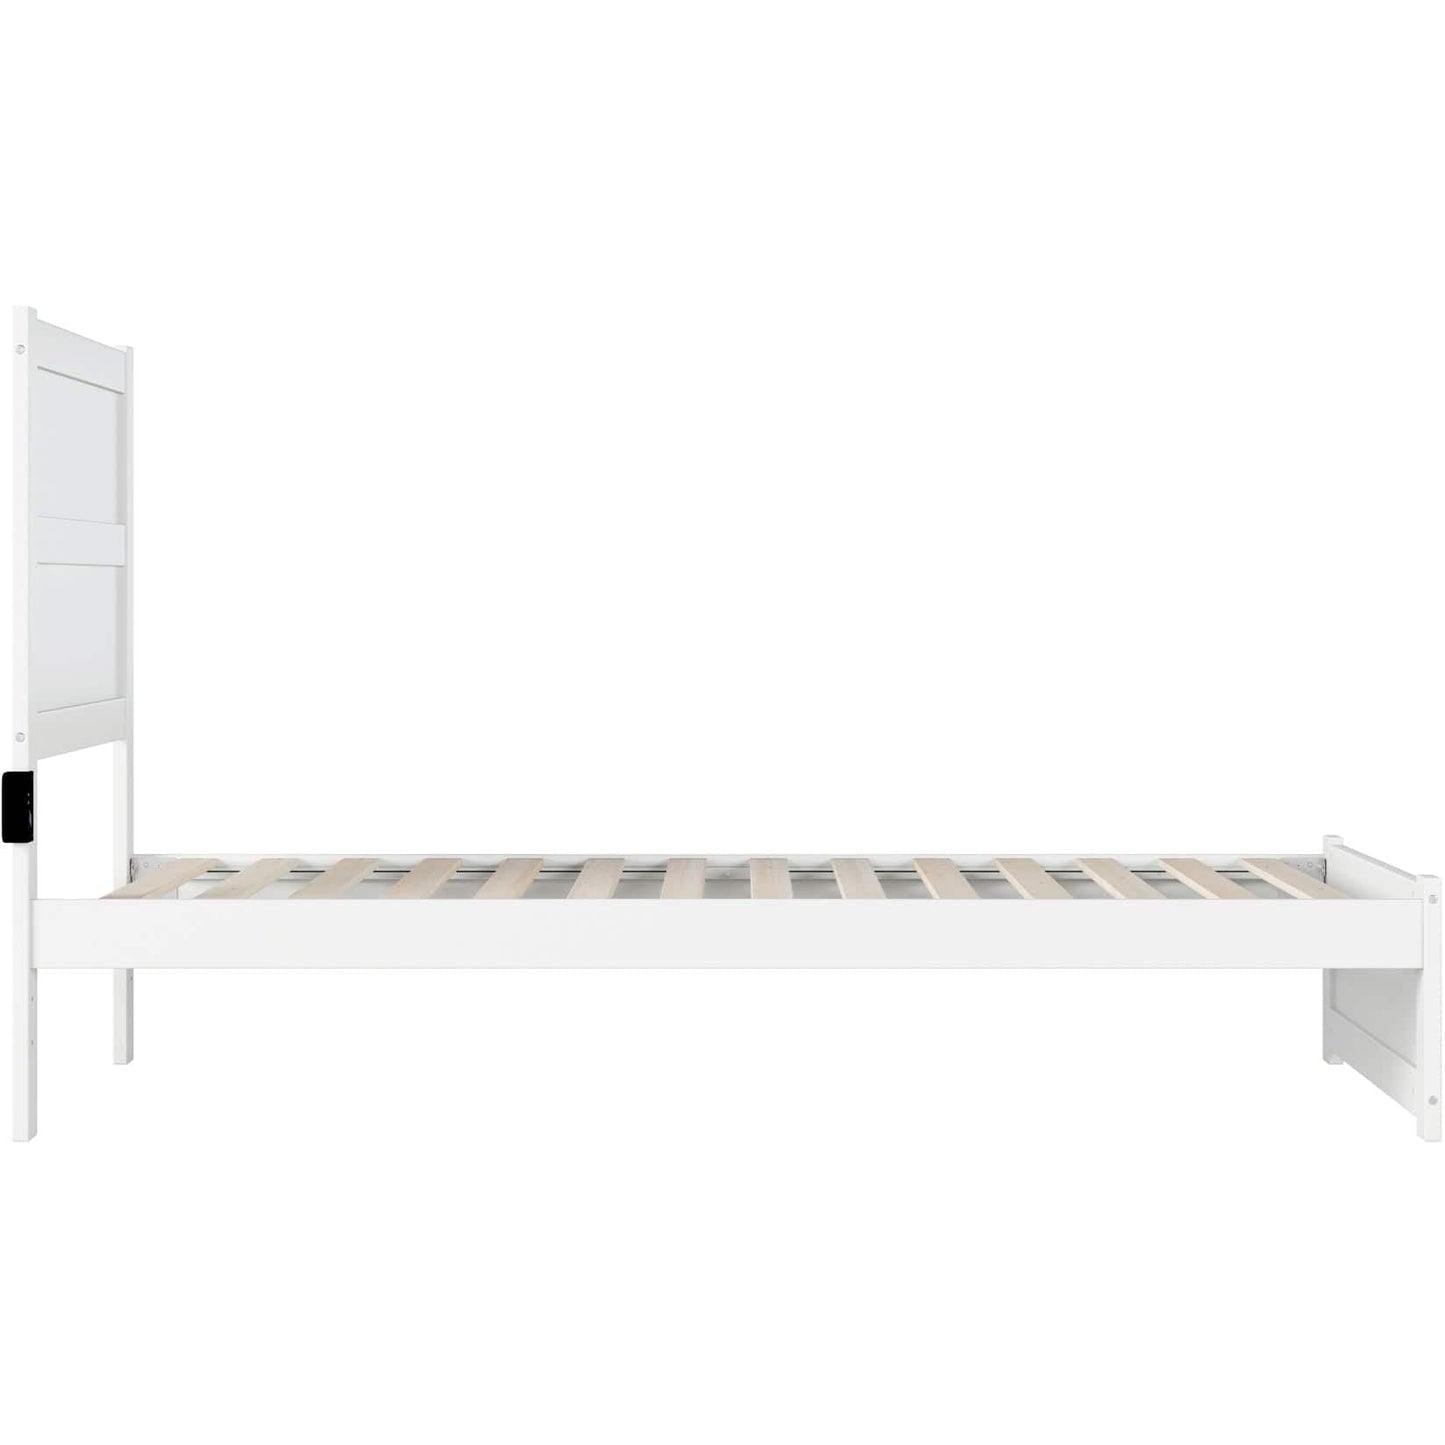 AFI Furnishings NoHo Twin Extra Long Bed with Footboard in White AG9160012